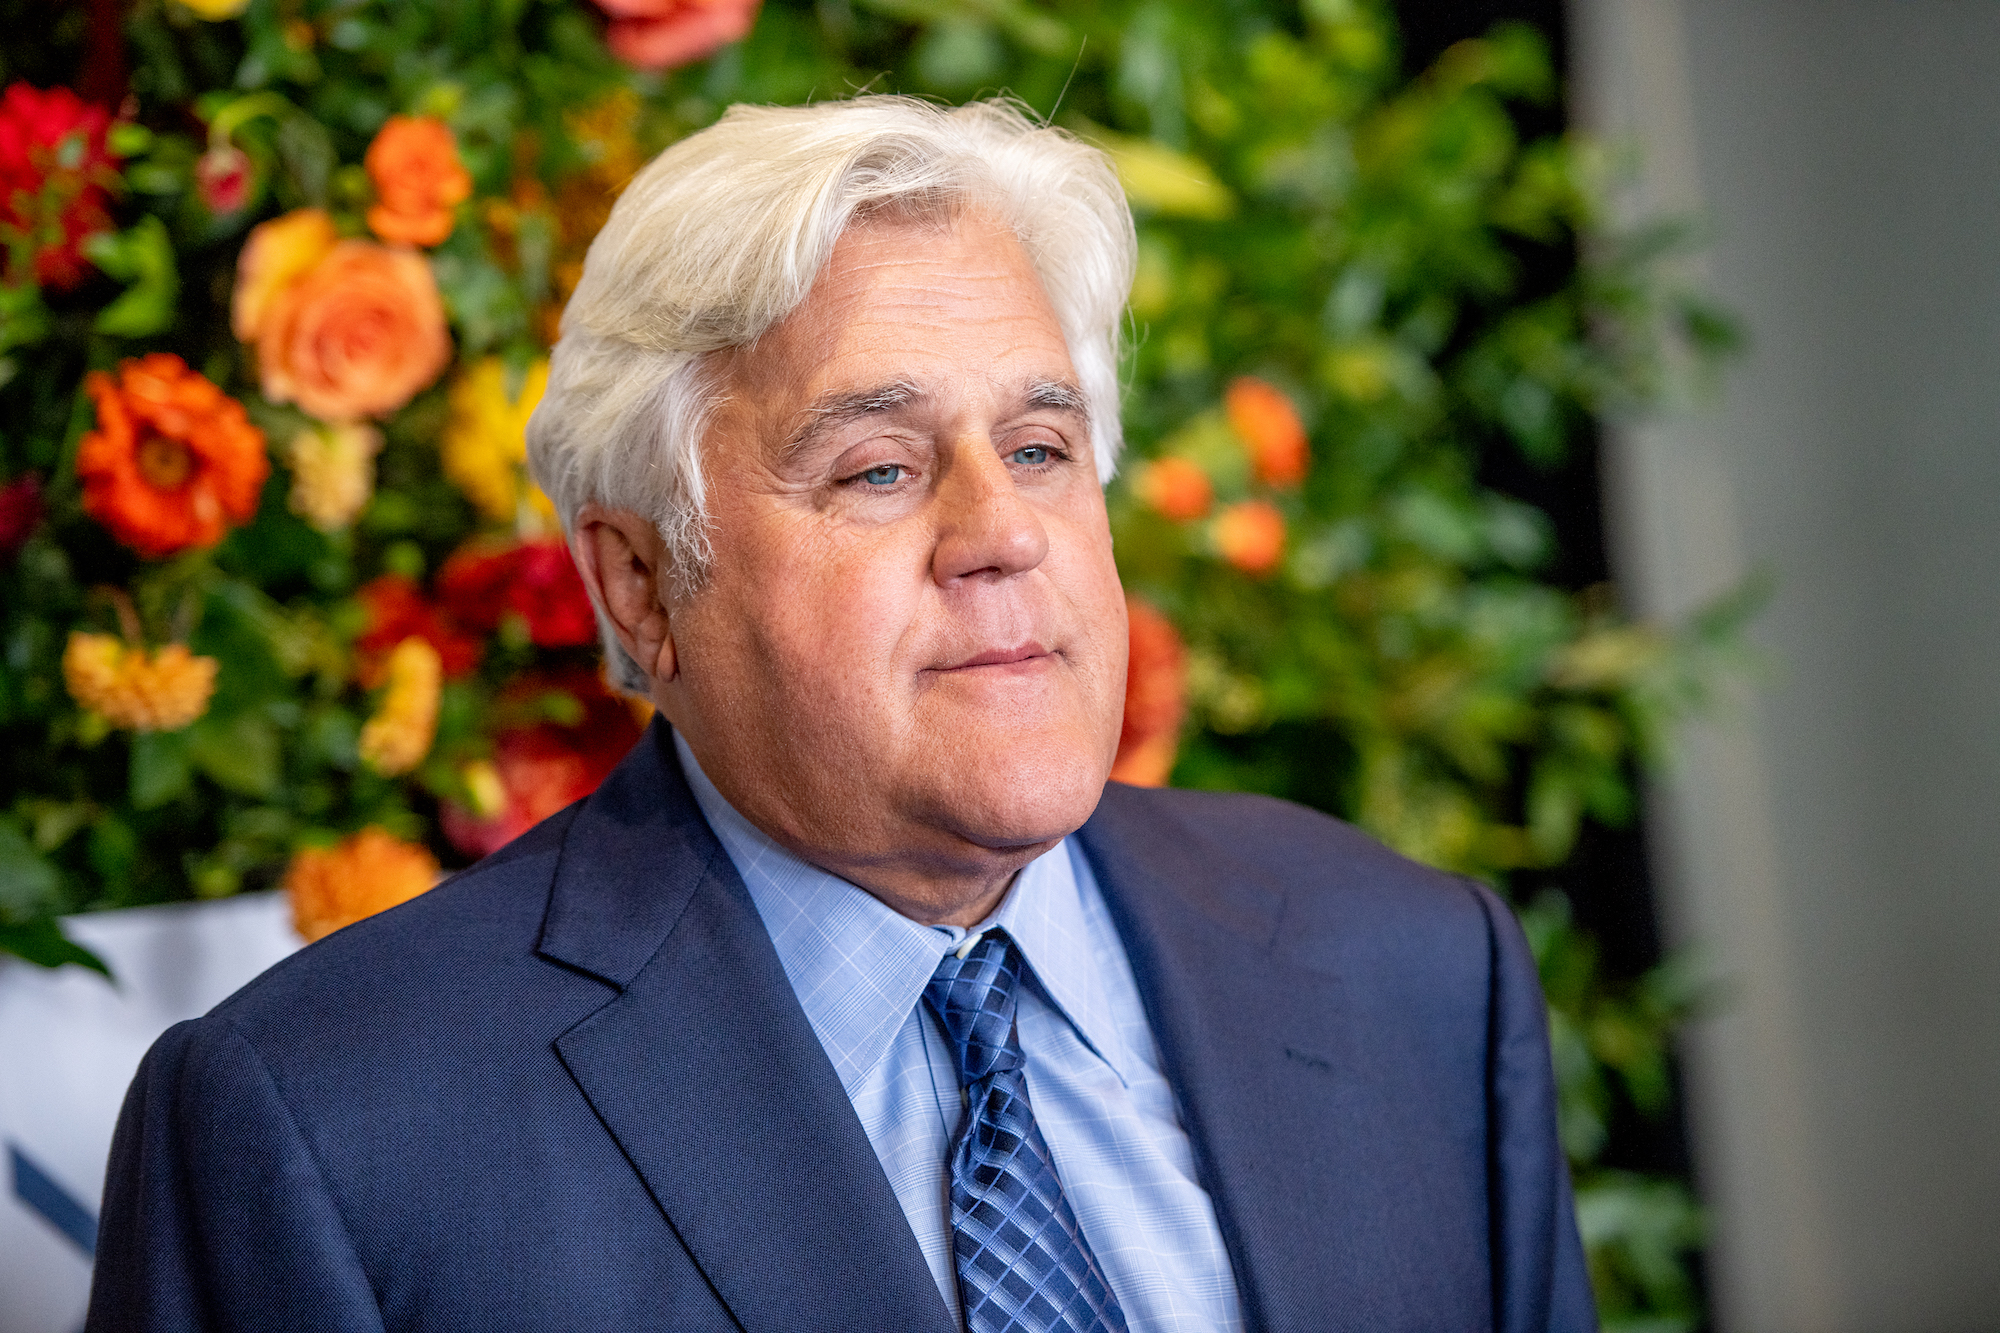 Jay Leno smiling in front of a green background